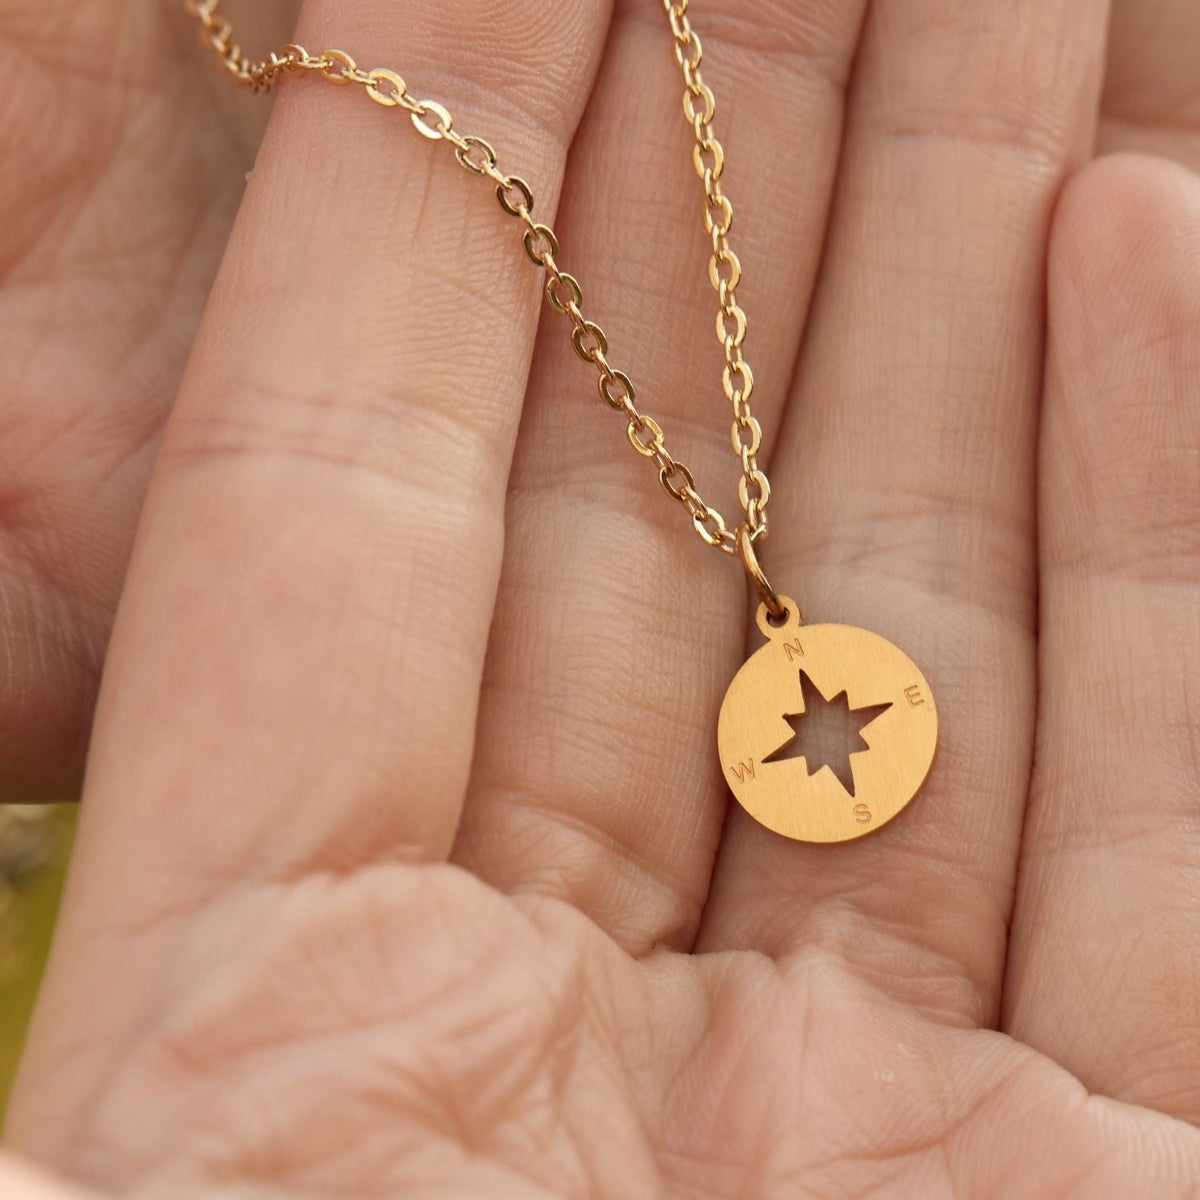 In Loving Memory of your Mom | Her Memory a Treasure | Compass Necklace